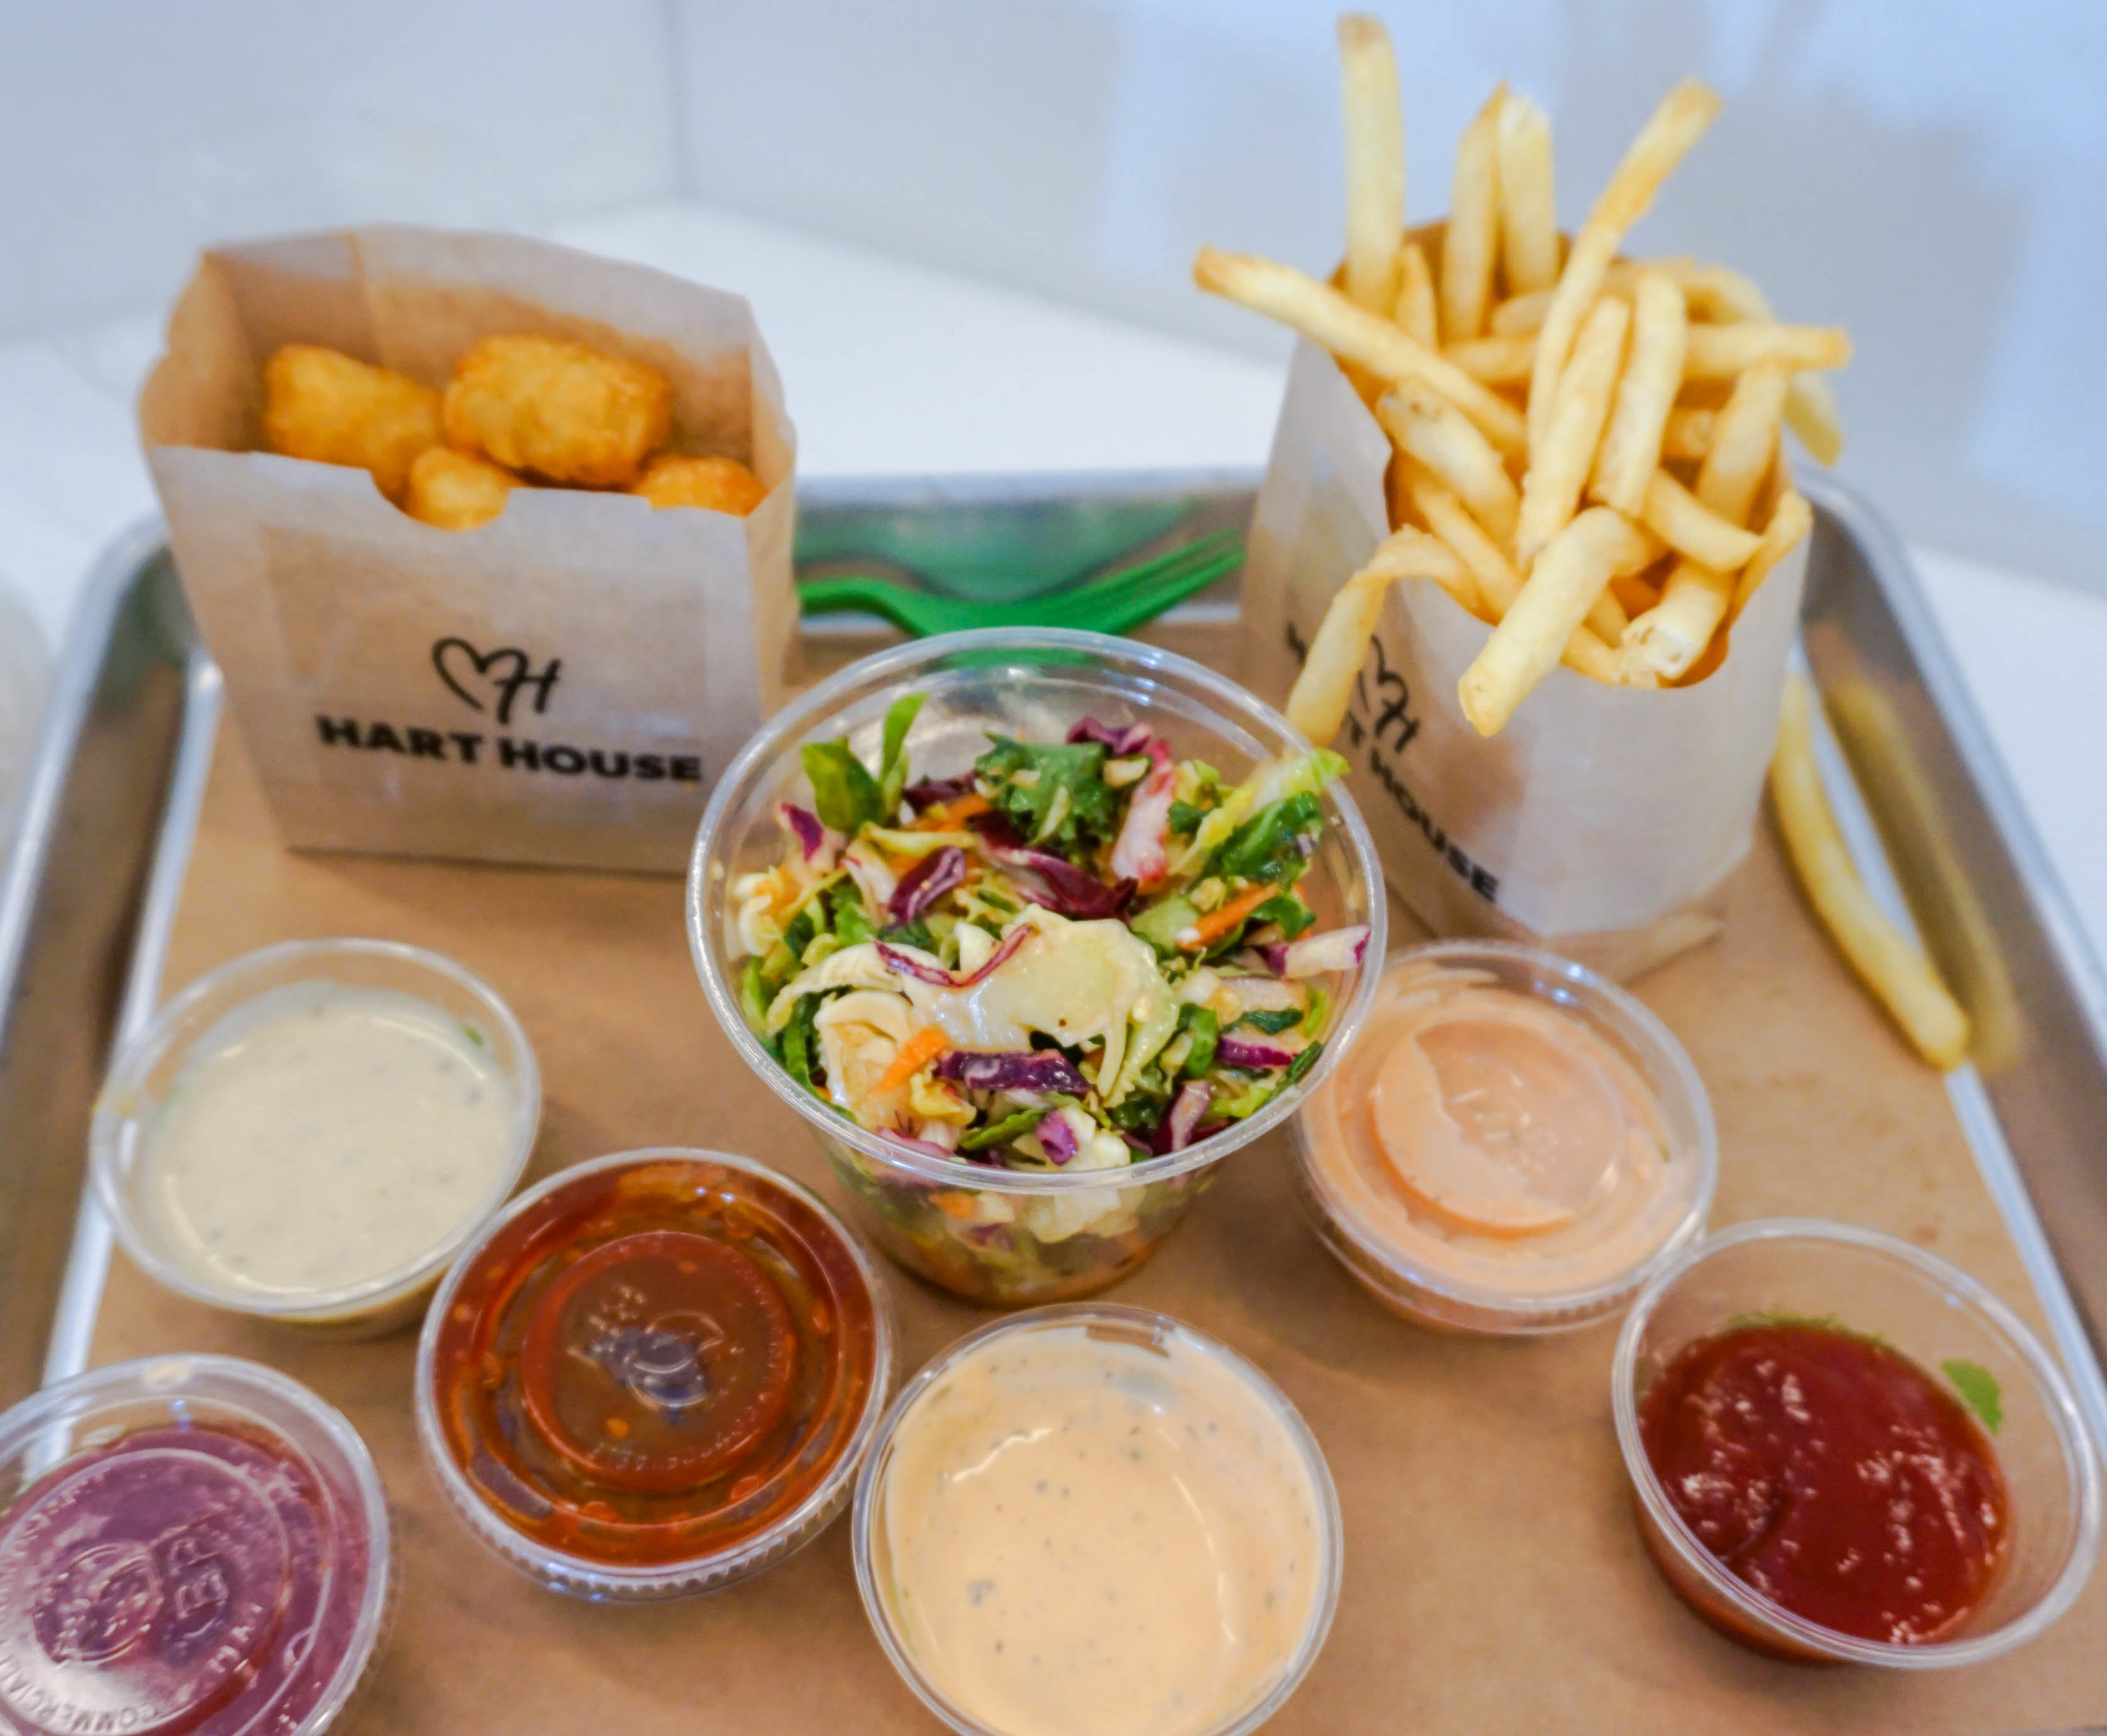 fries, tots, salad, and dipping sauces